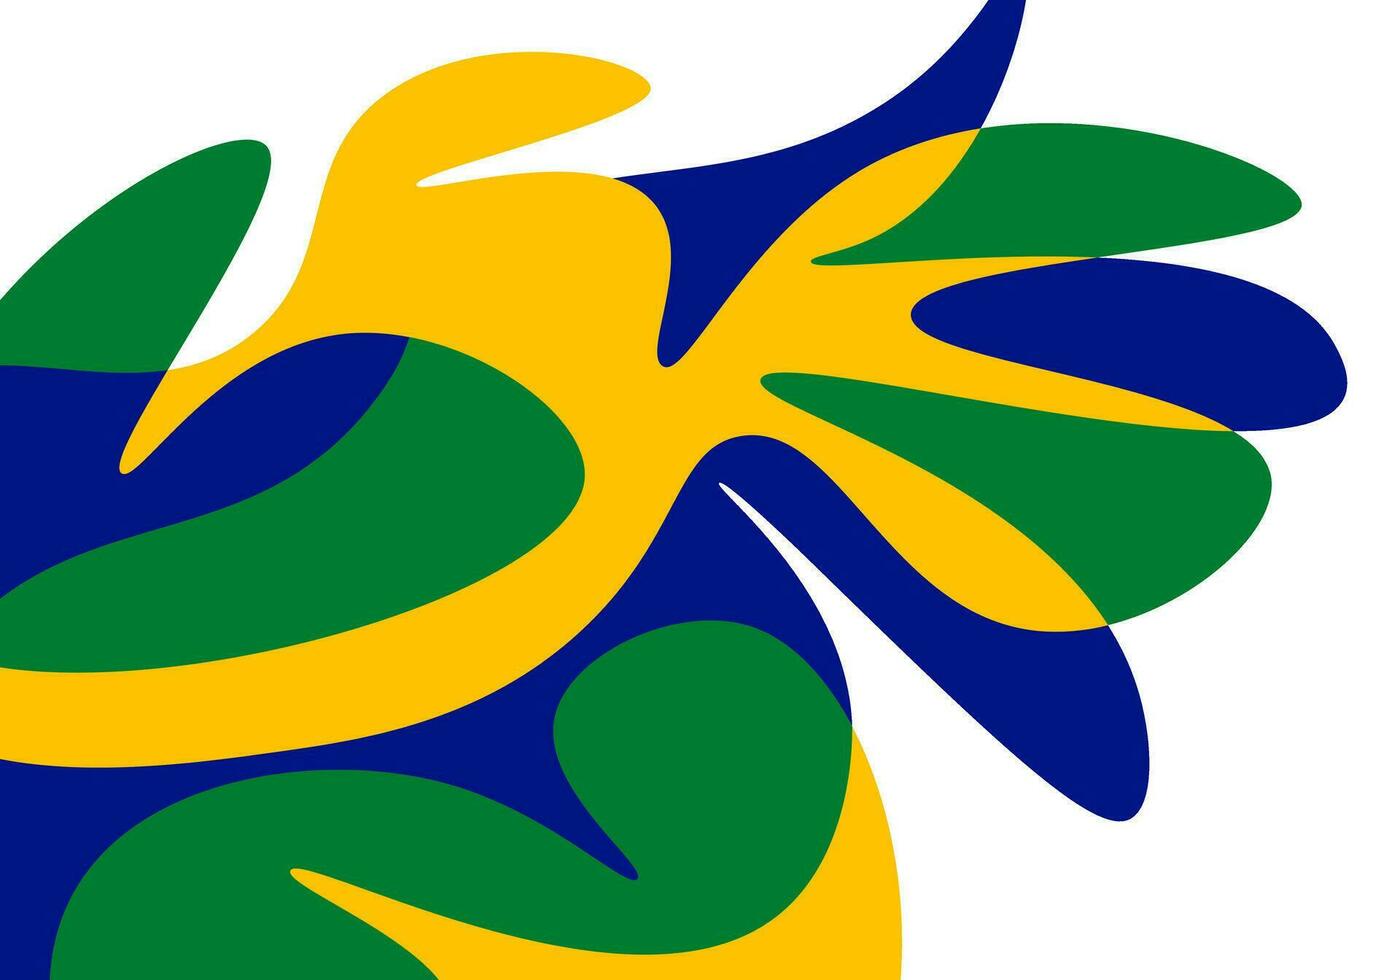 Abstract rio wing wavy pattern background brazil colors. Vector illustration